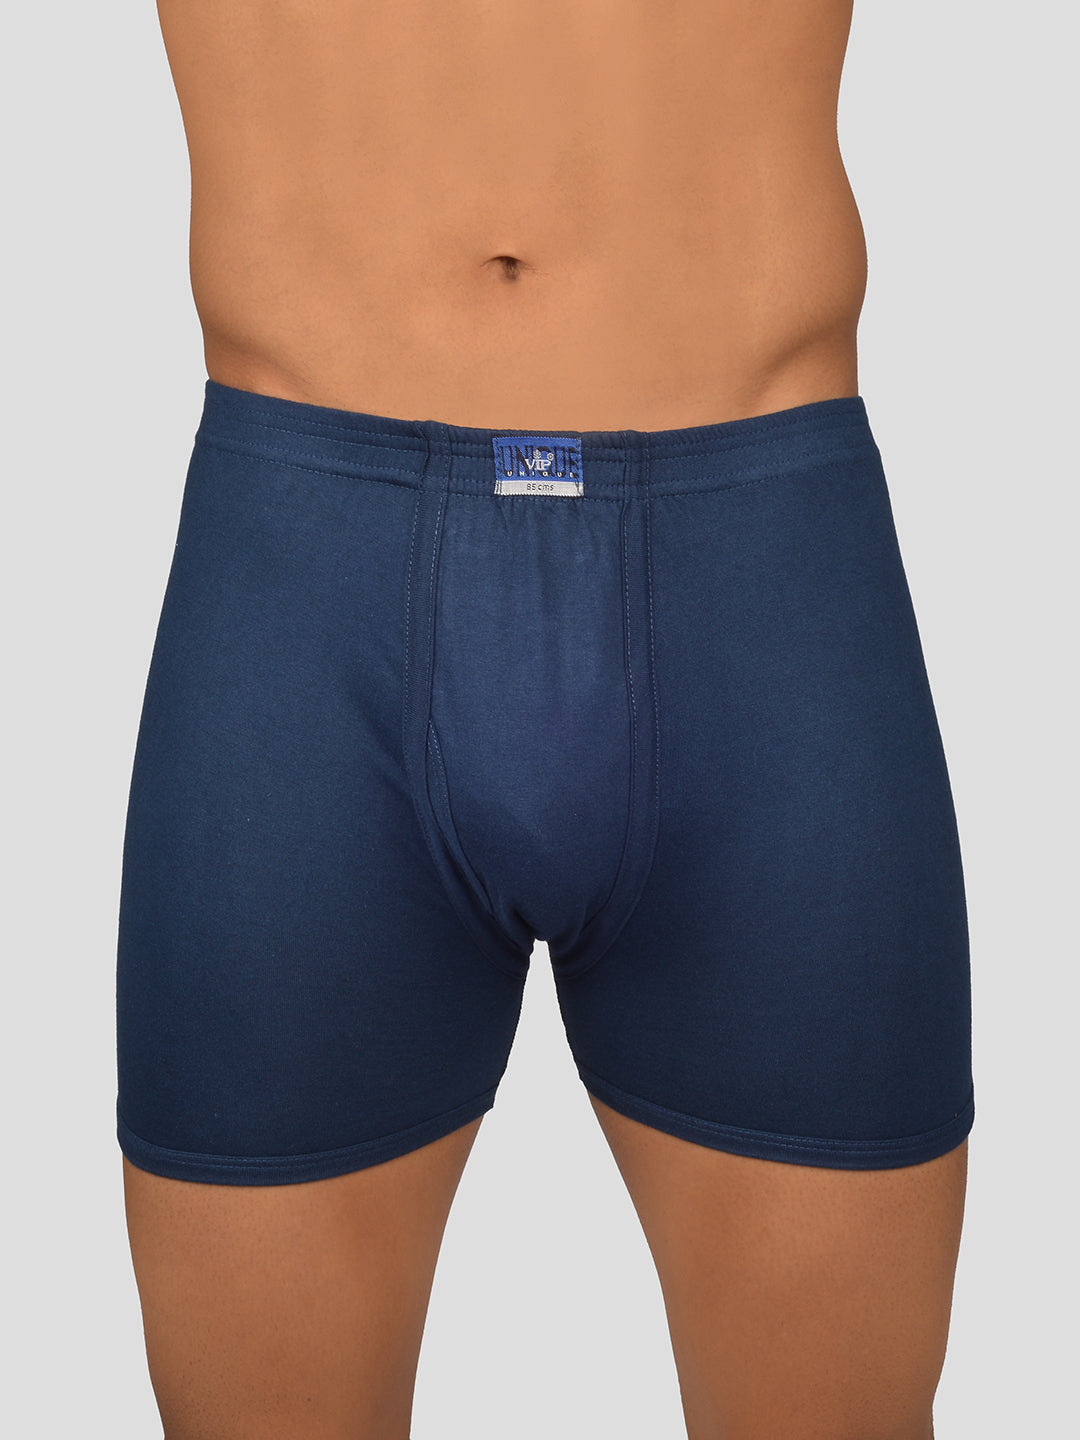 Buy online Blue Pure Cotton Trunks from Innerwear for Men by Freecultr for  ₹300 at 33% off